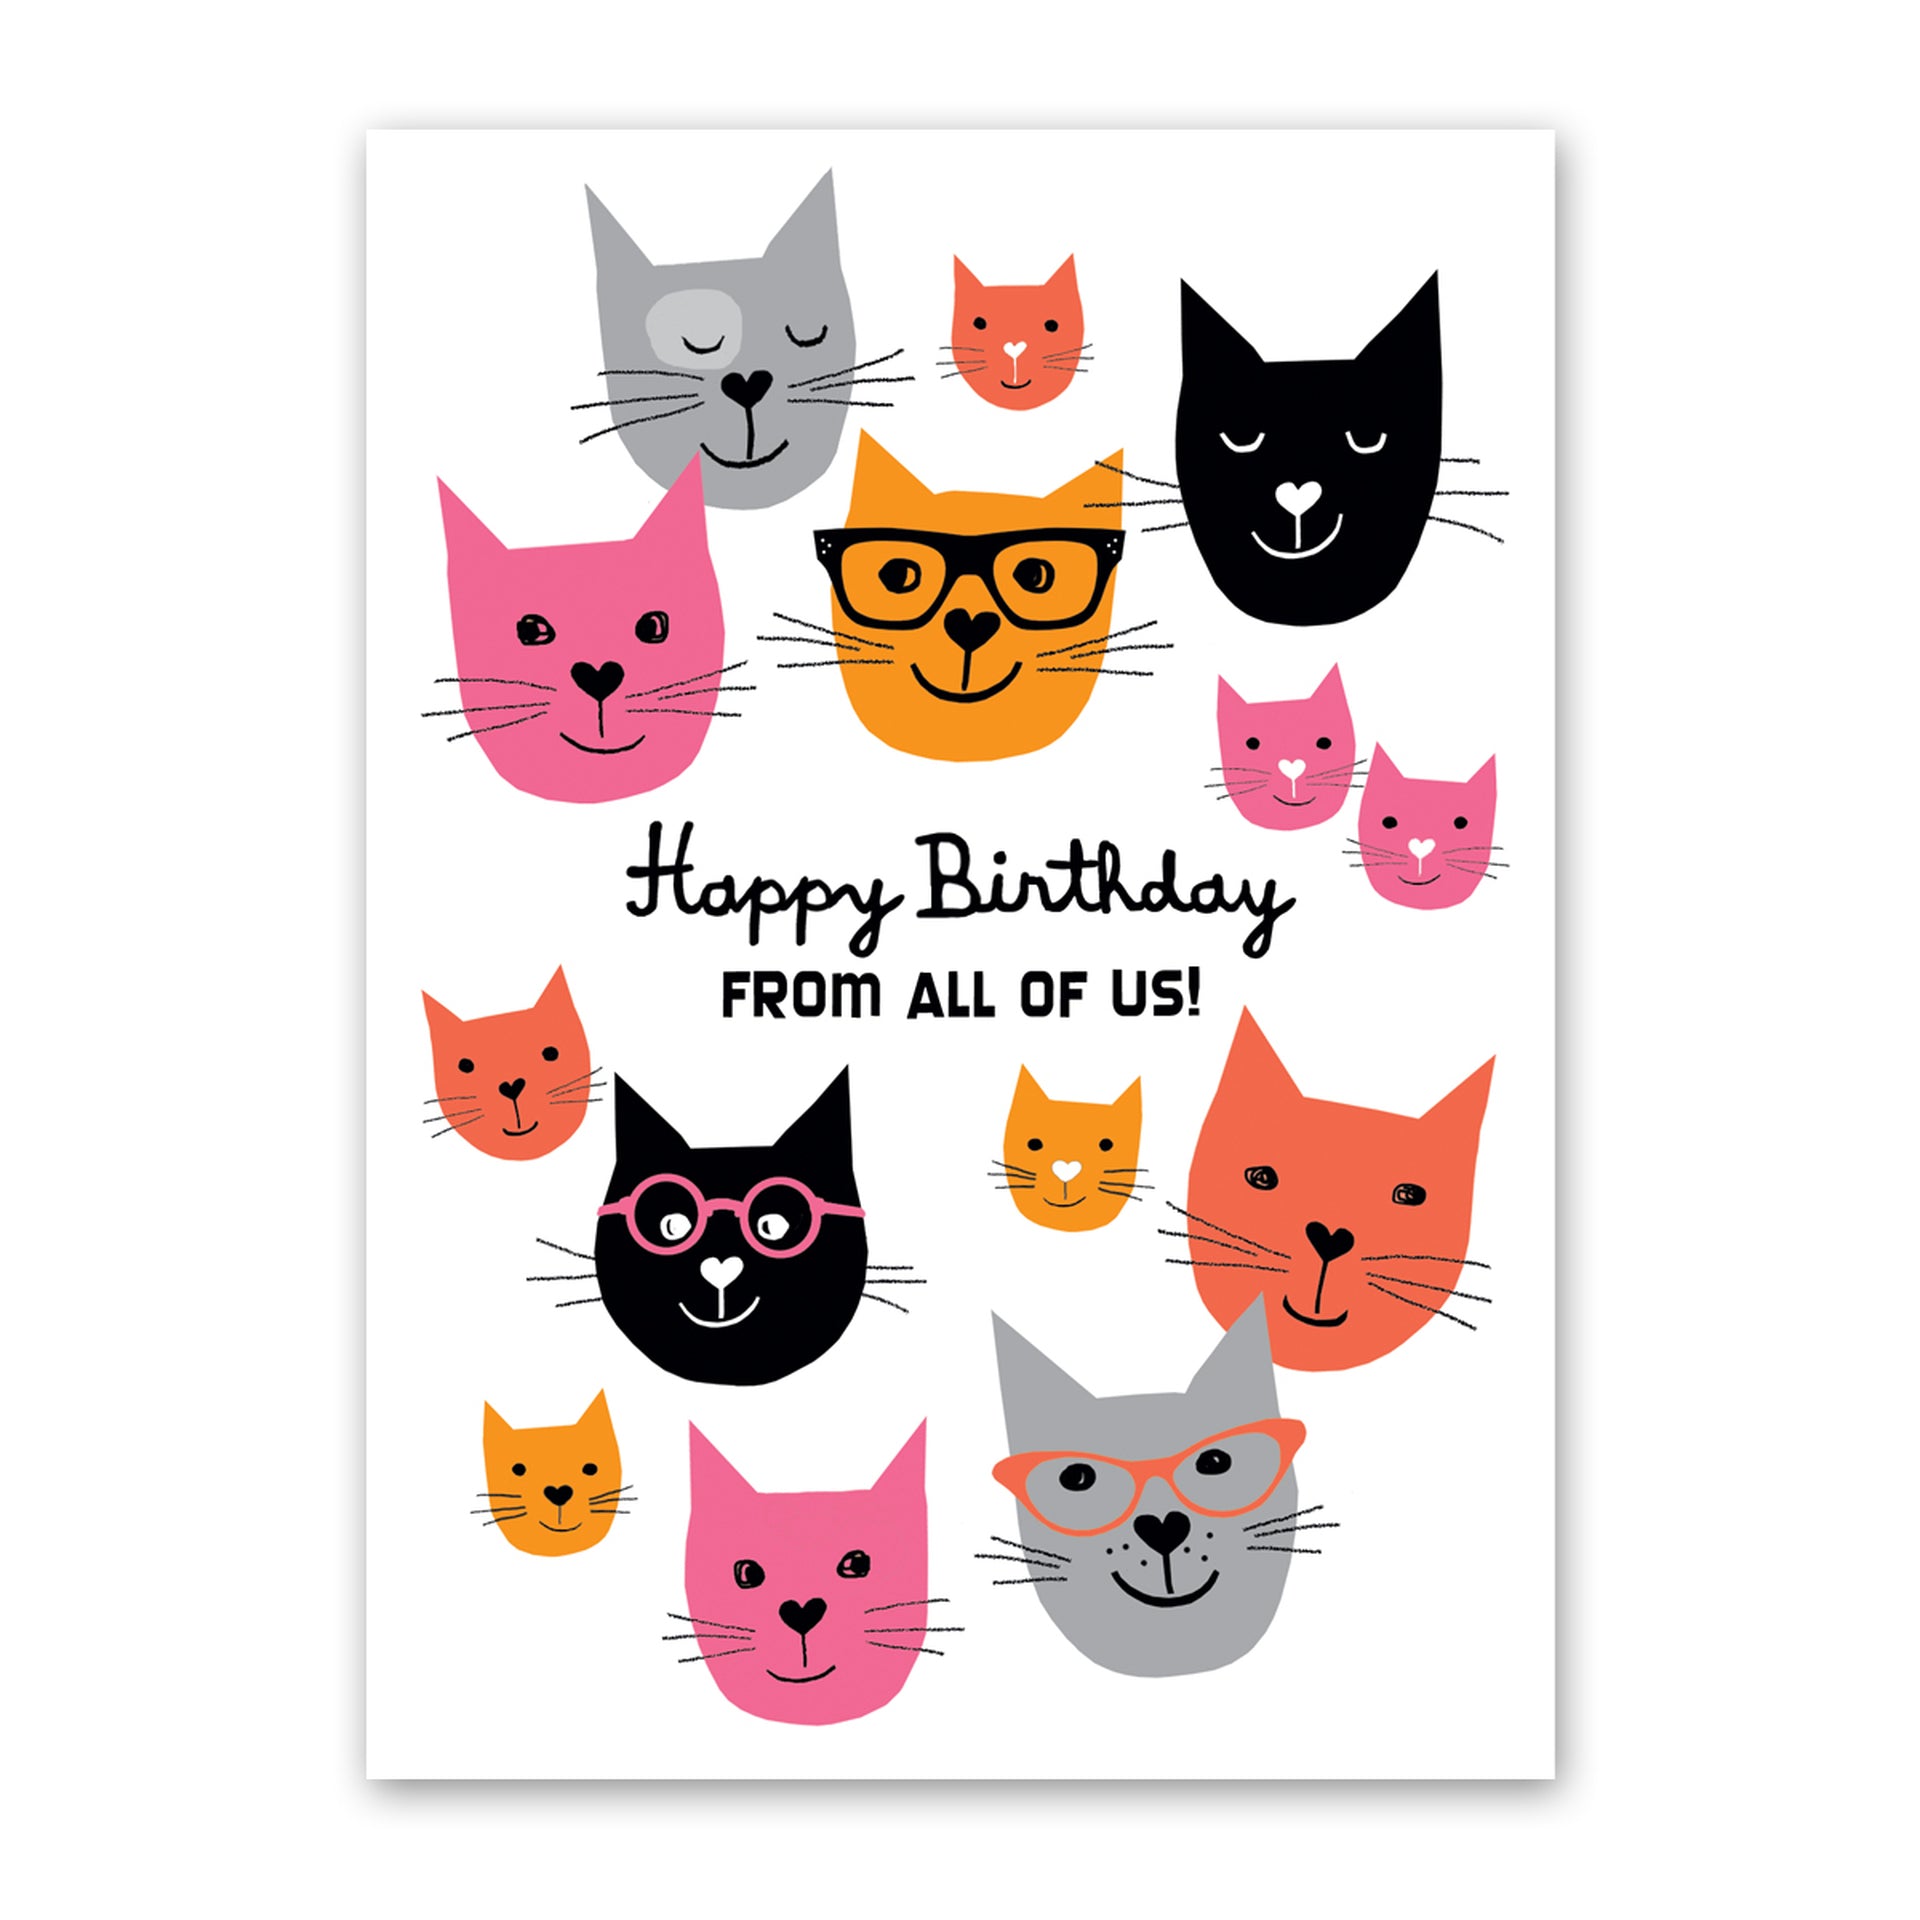 Happy Birthday from all of us cats greeting card